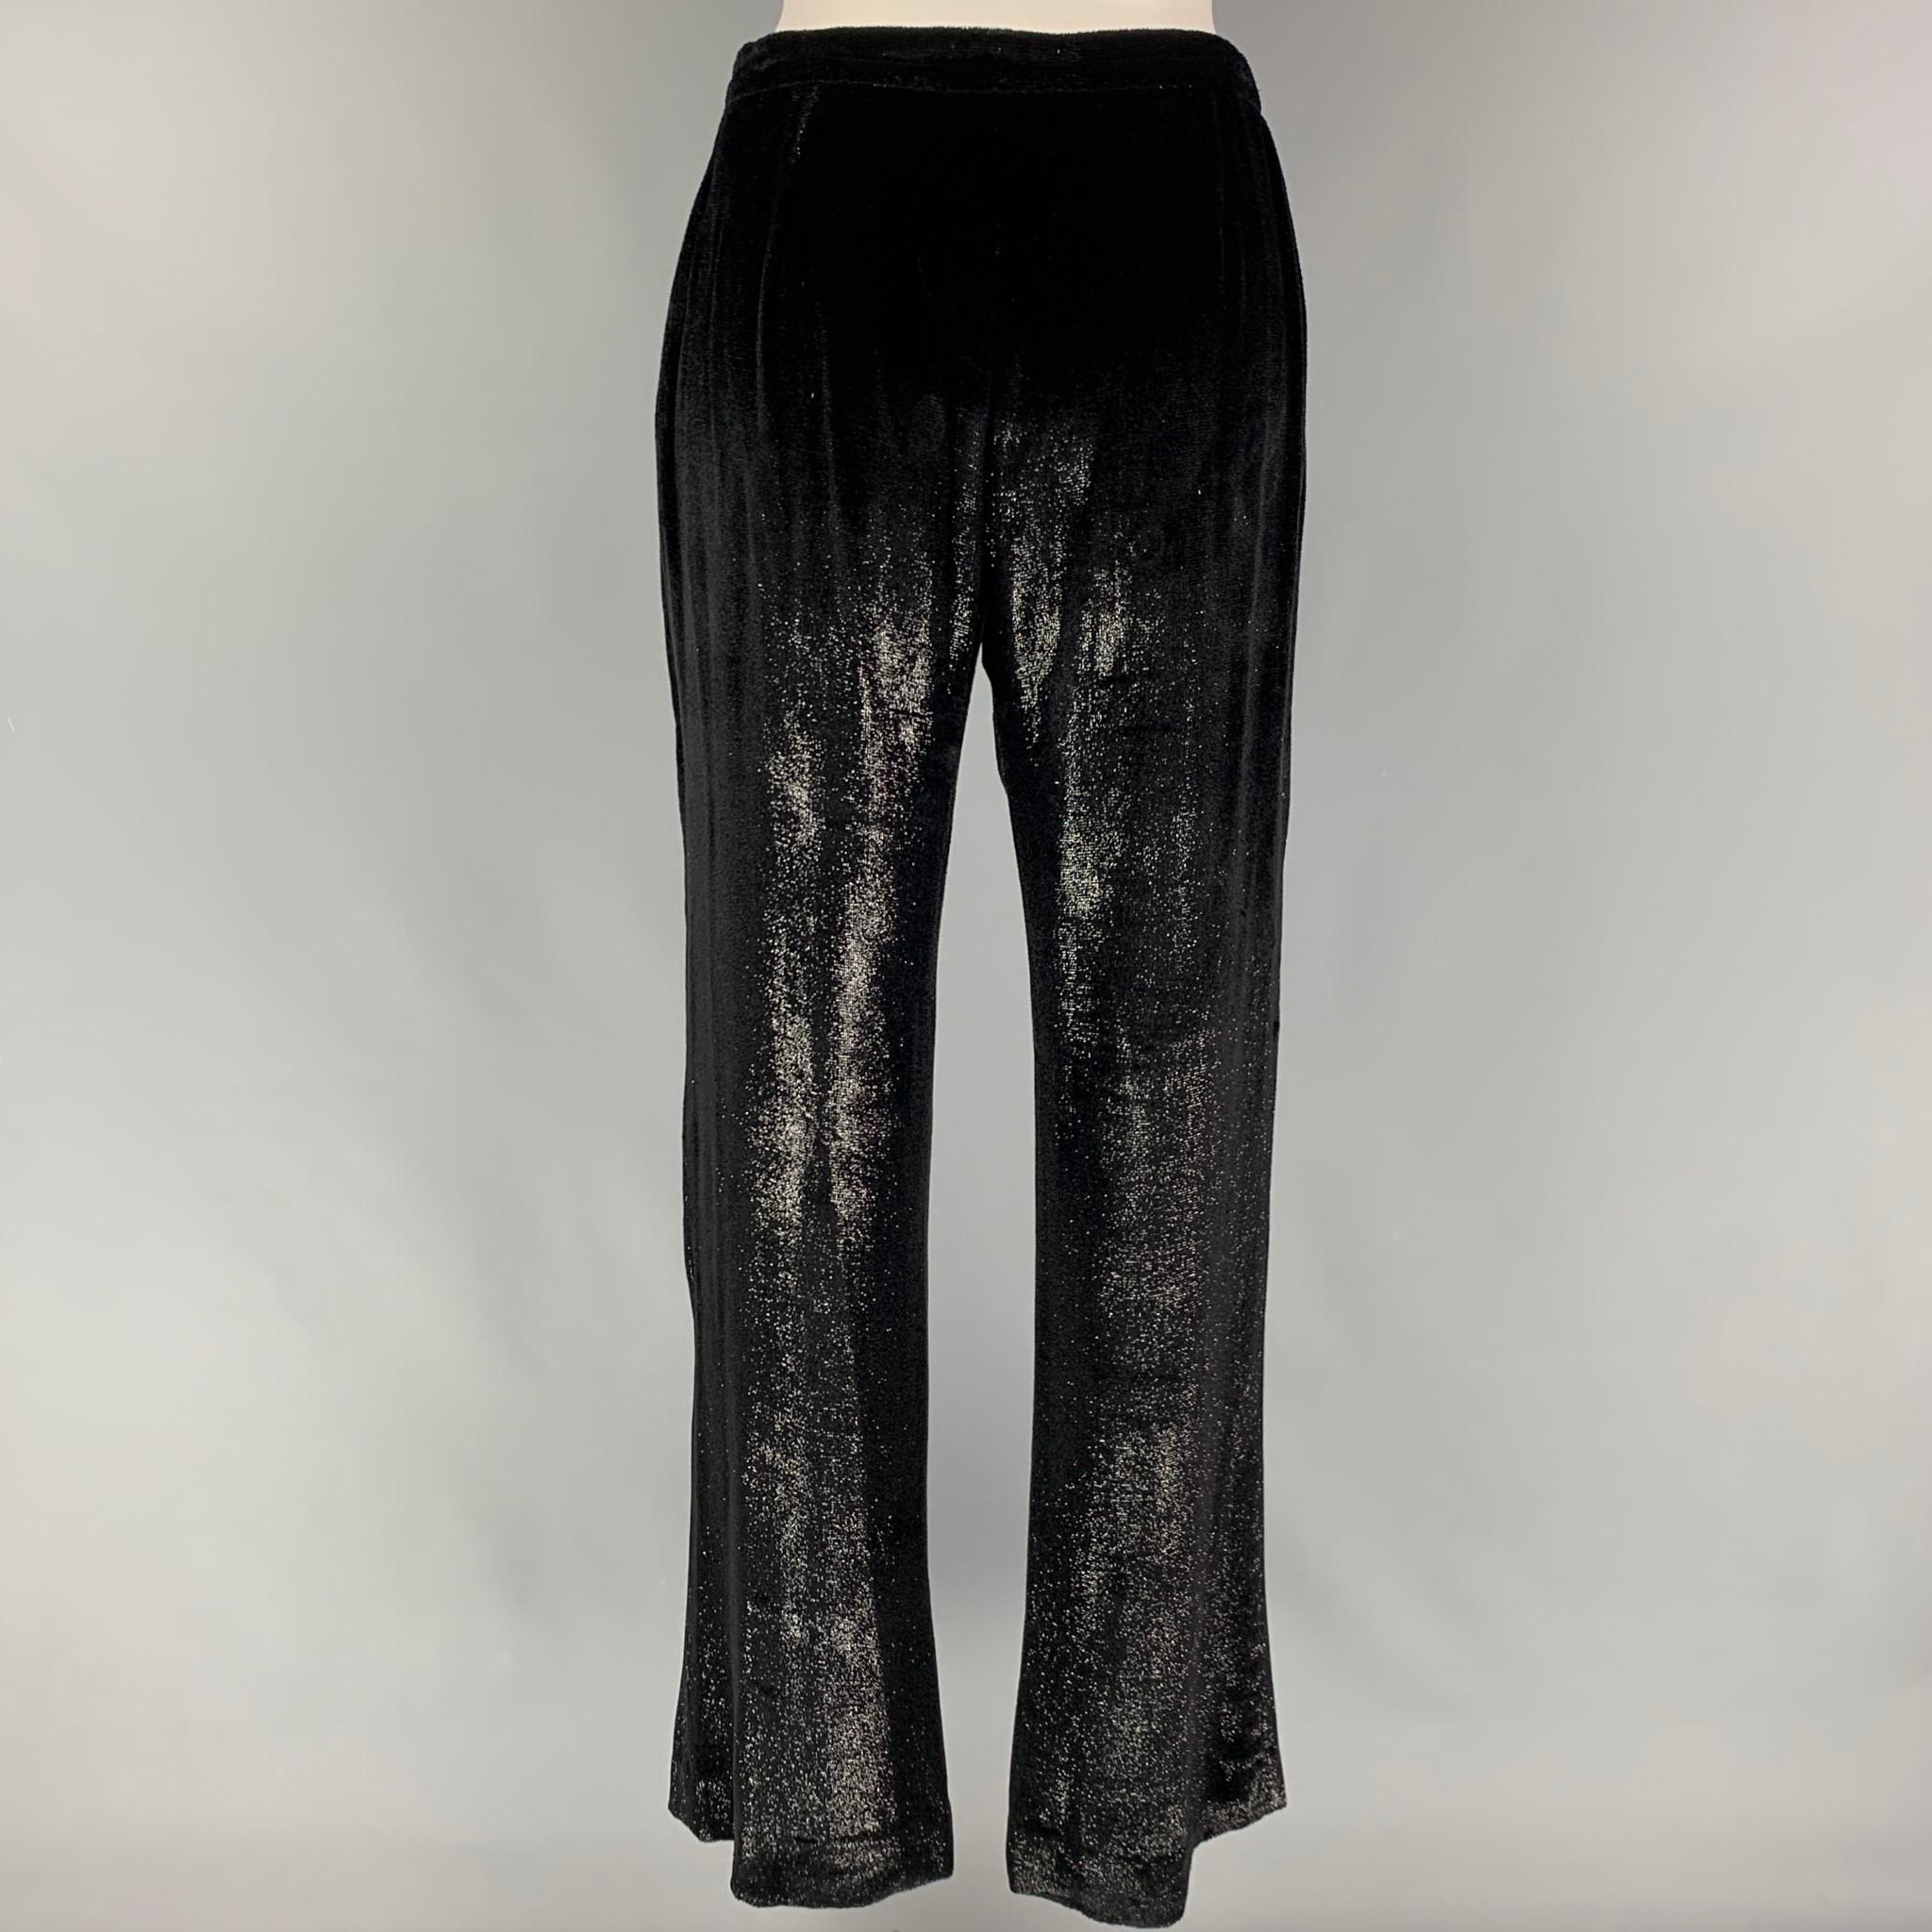 GIORGIO ARMANI pants come in a black velvet sparkly viscose blend featuring a wide lep and a side zip up closure. Made in Italy. 

Very Good Pre-Owned Condition.
Marked: 40

Measurements:

Waist: 27 in.
Rise: 9 in.
Inseam: 32 in. 